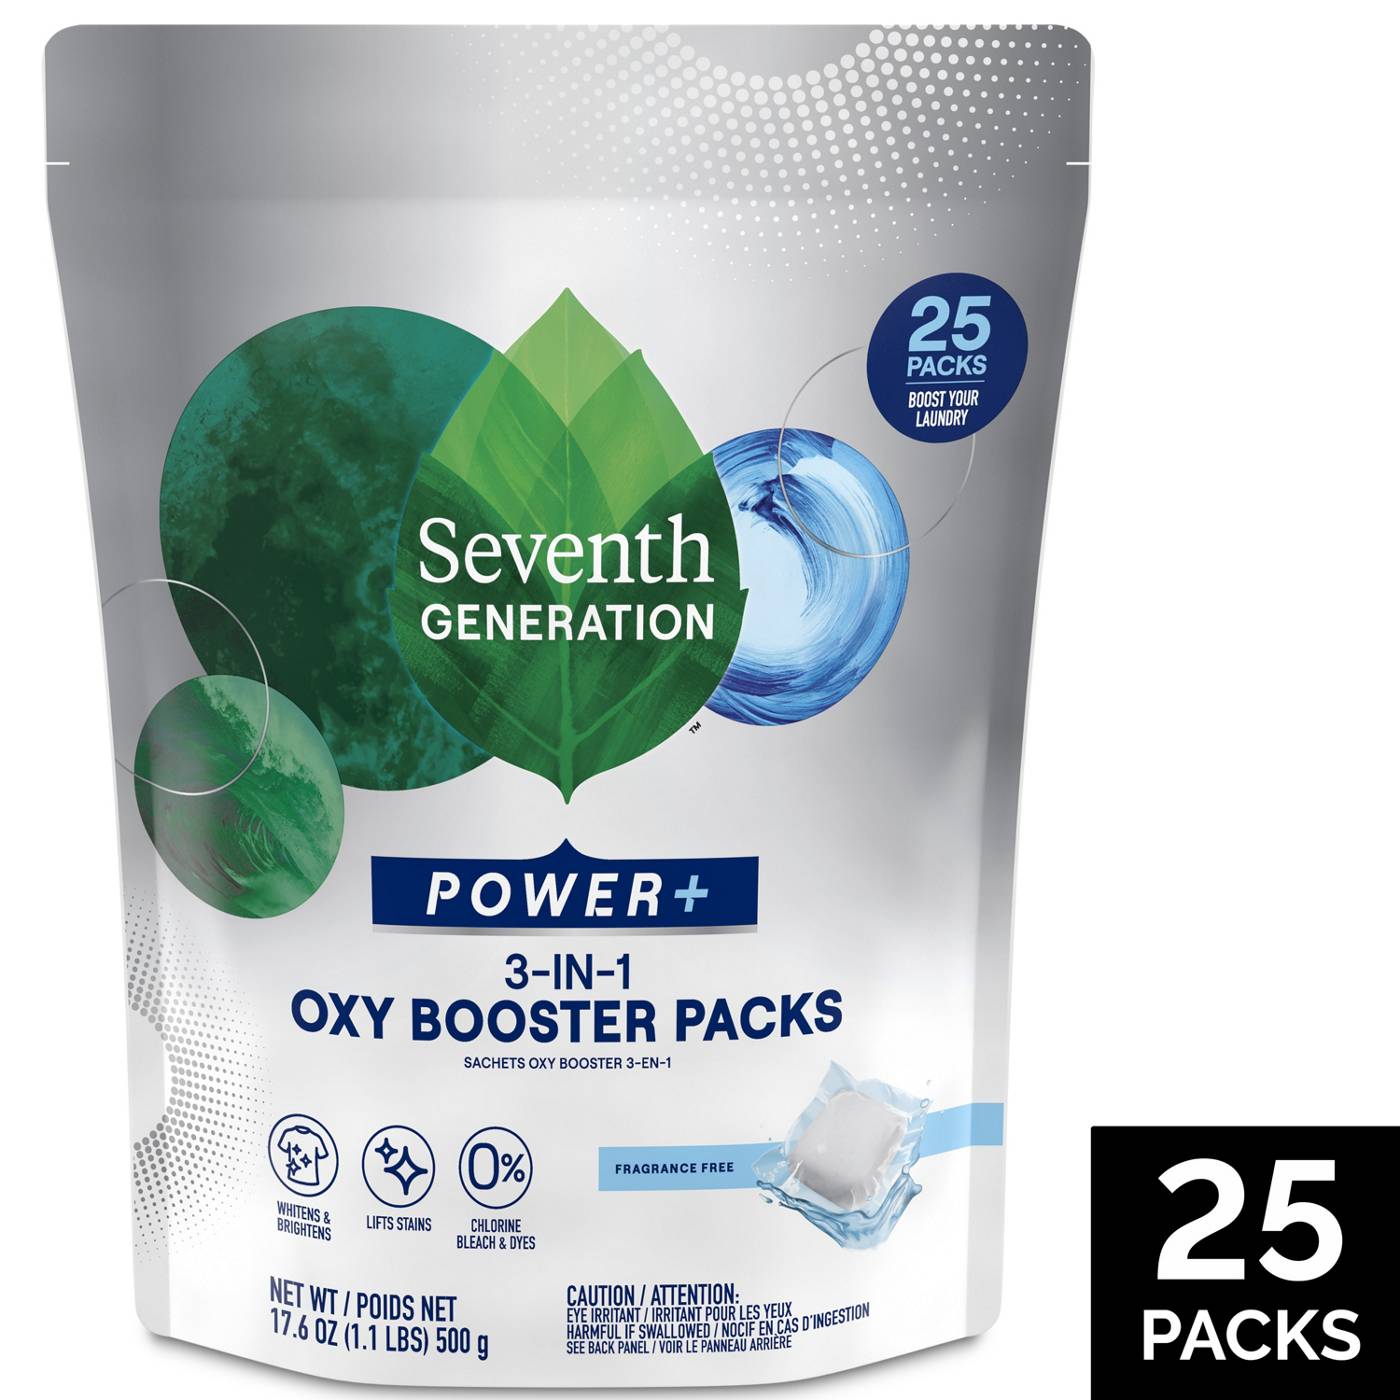 Seventh Generation Power+ 3-in-1 Oxy Booster Laundry Detergent Packs; image 7 of 7